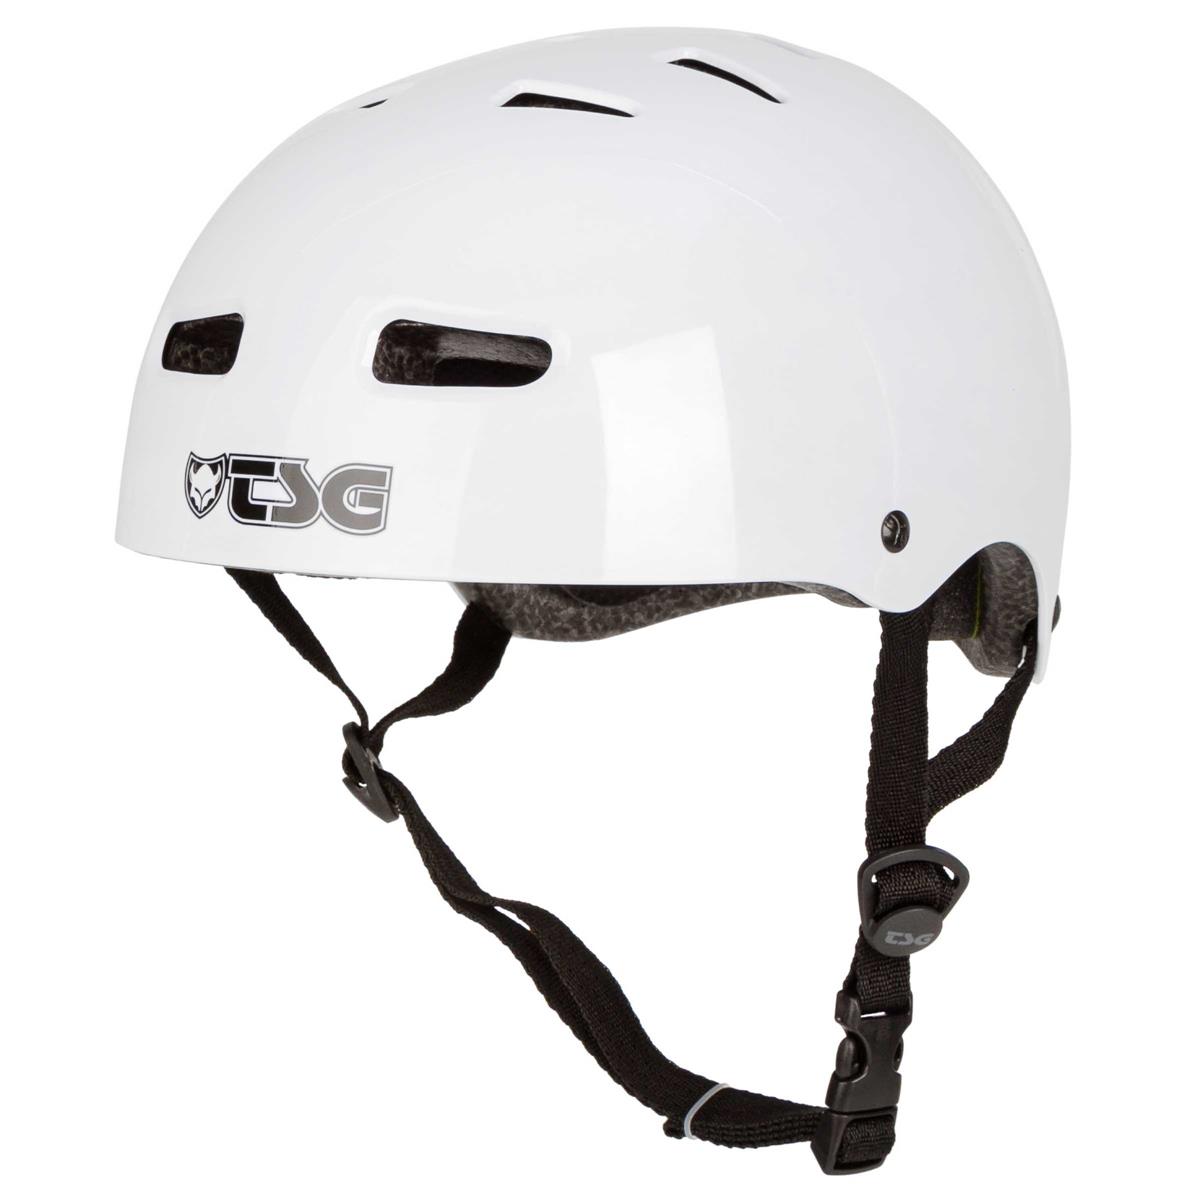 TSG Casco BMX/Dirt Skate/BMX Injected Color - Injected Bianco